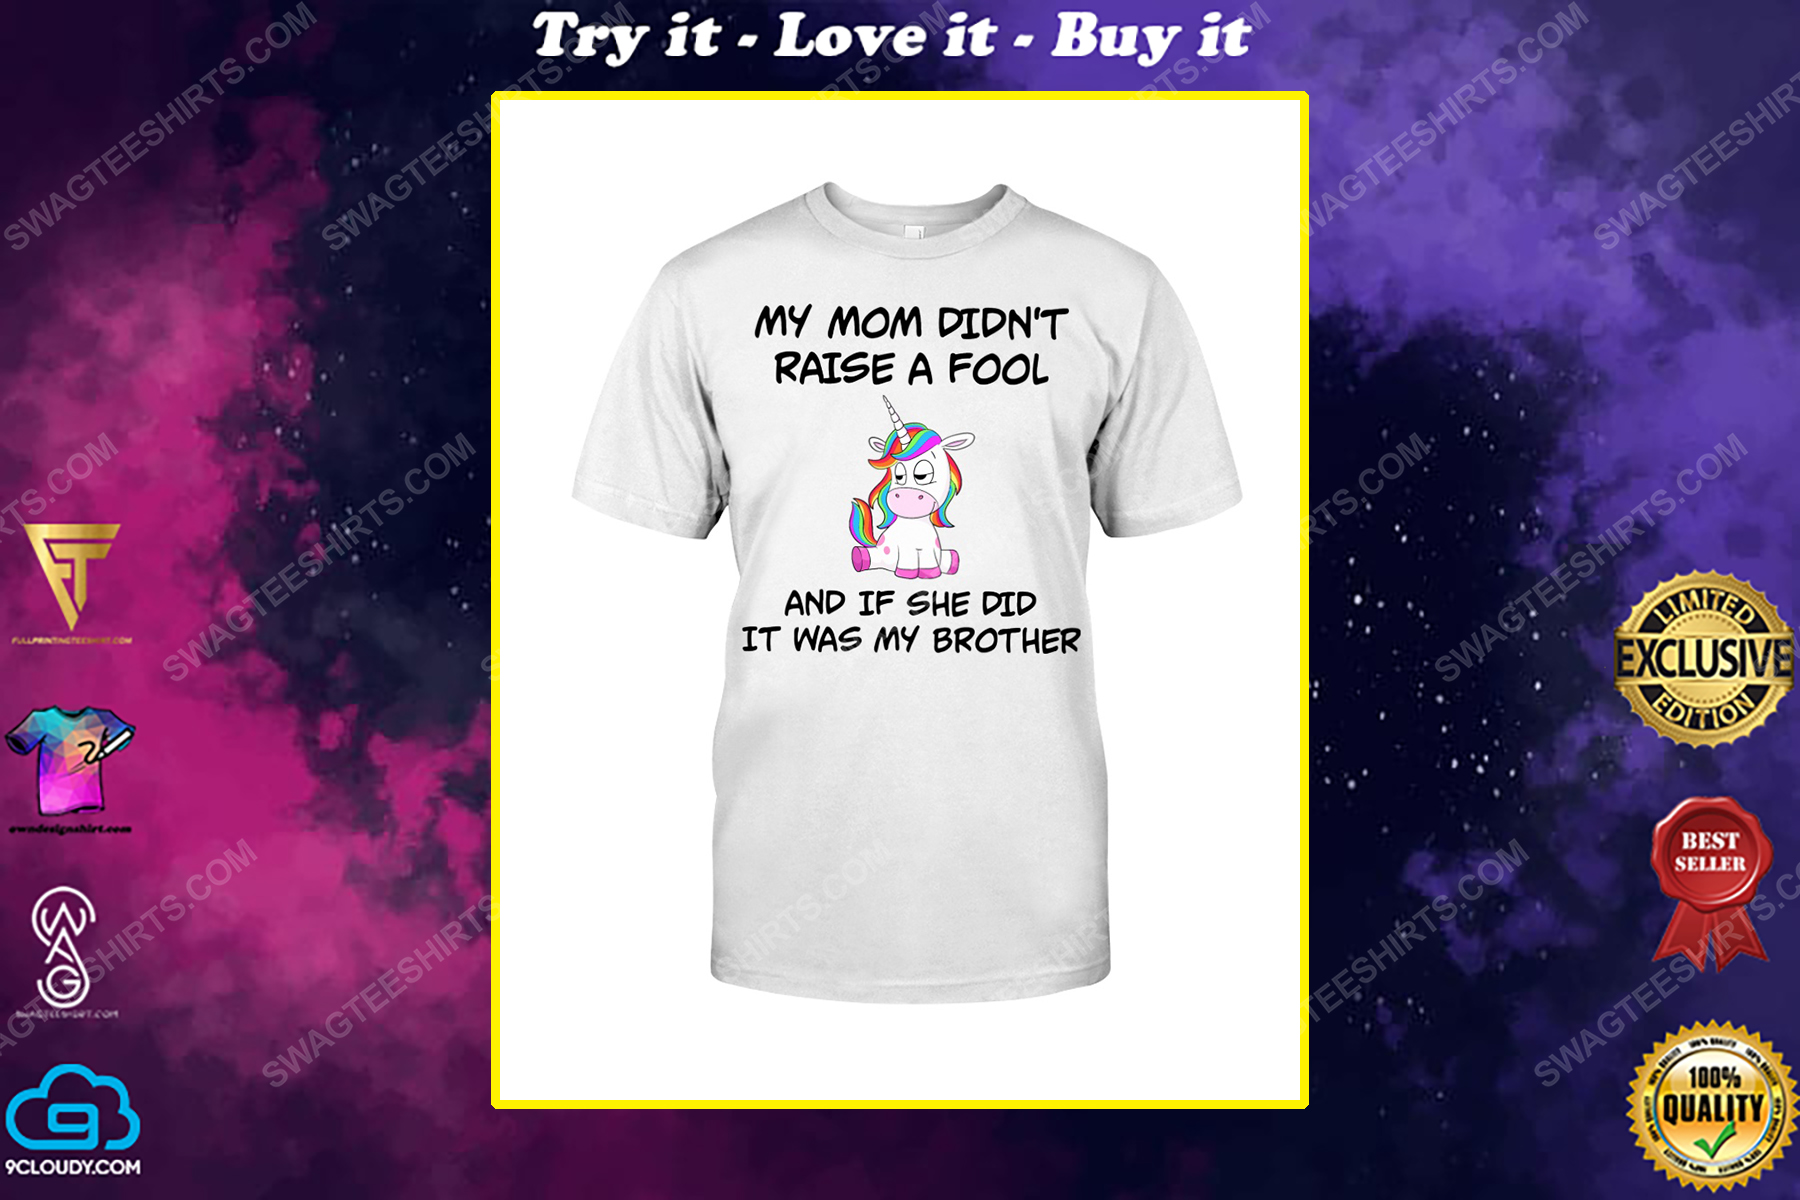 My mom didn't raise a fool and if she did it was my brother unicorn shirt